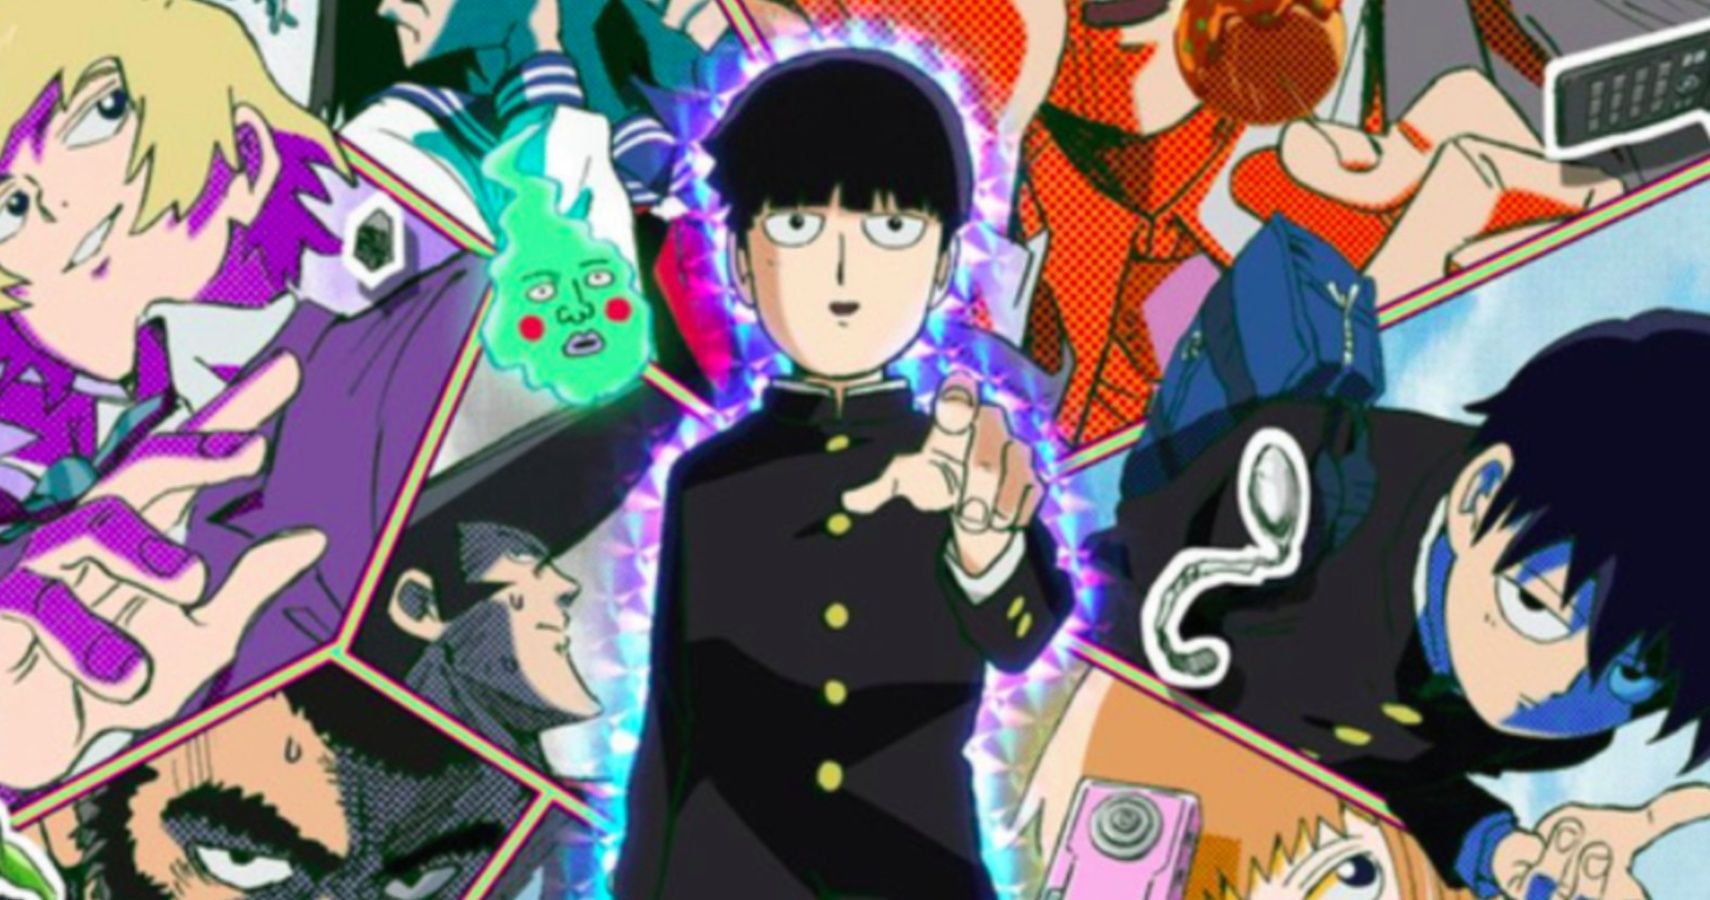 Mob Psycho 100 III - 01 - Lost in Anime